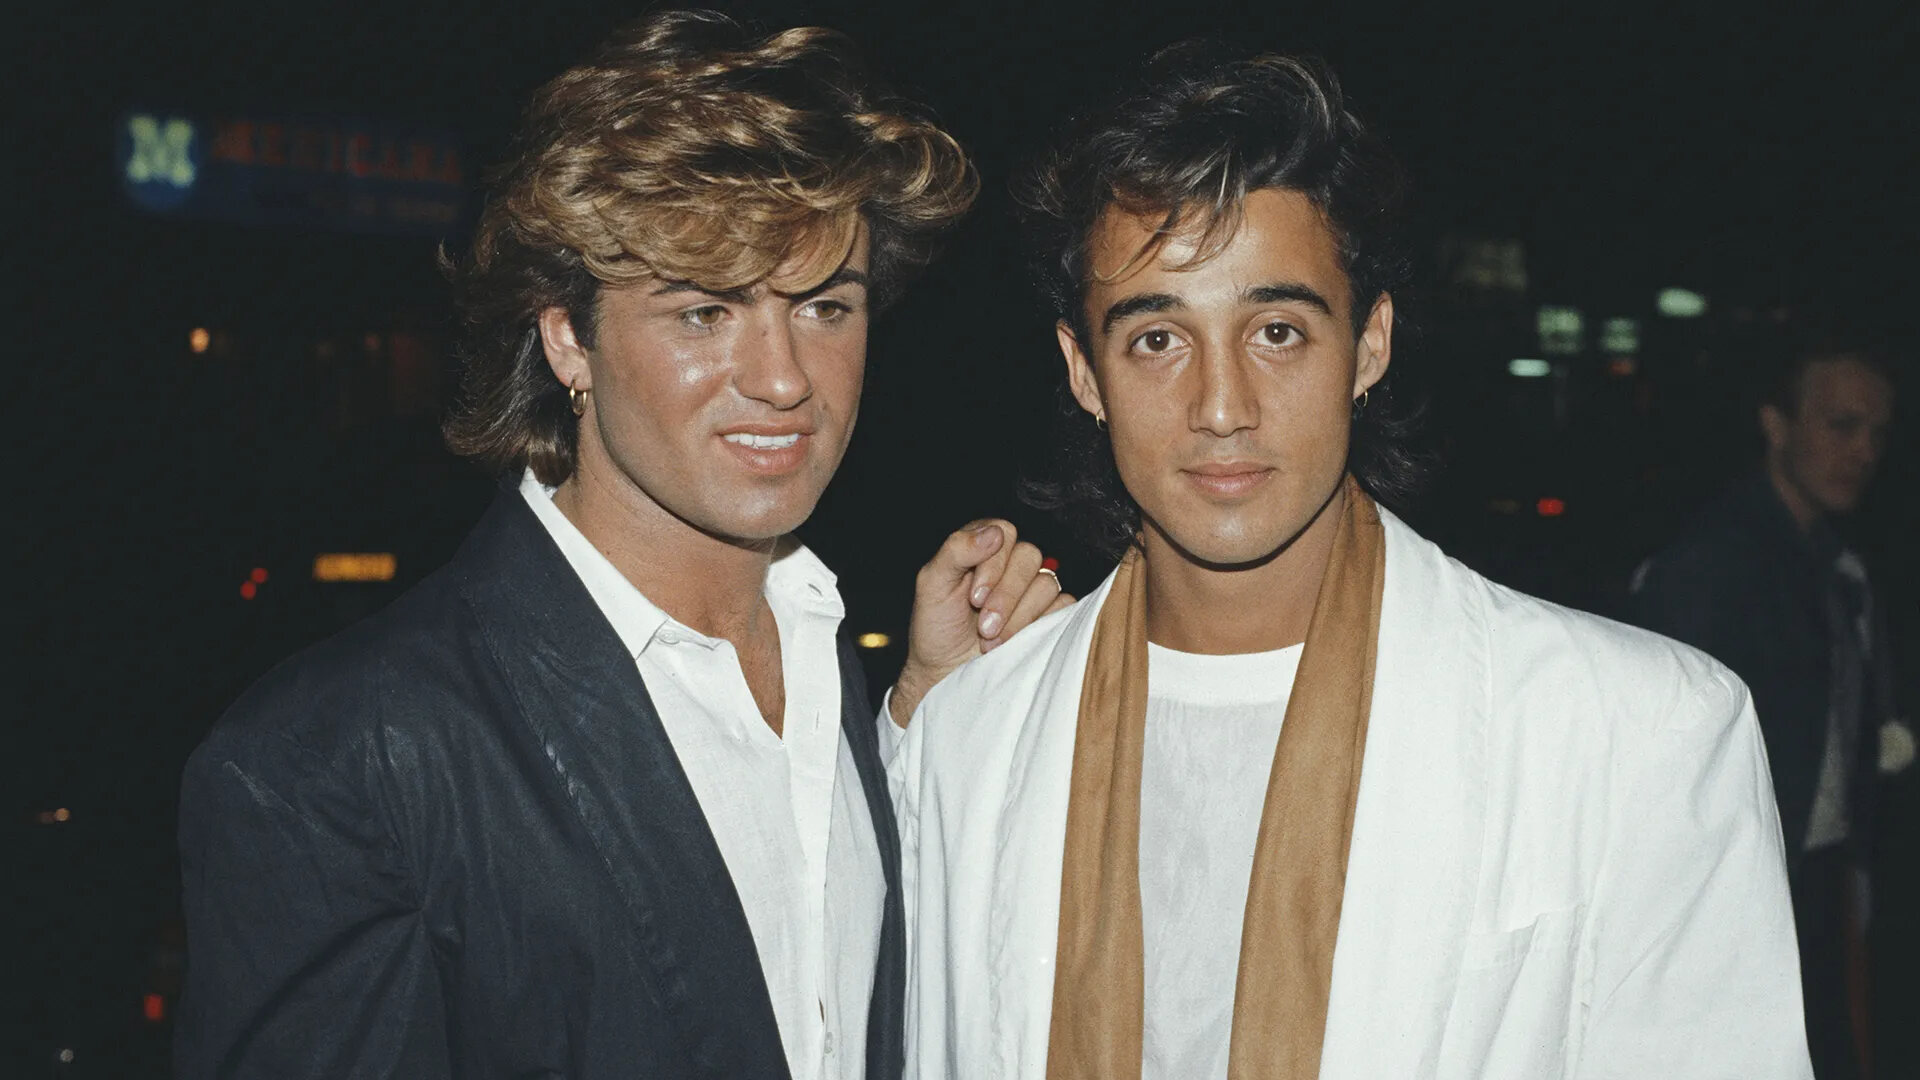 Which Singer Once Belonged To A Group Called Wham!?